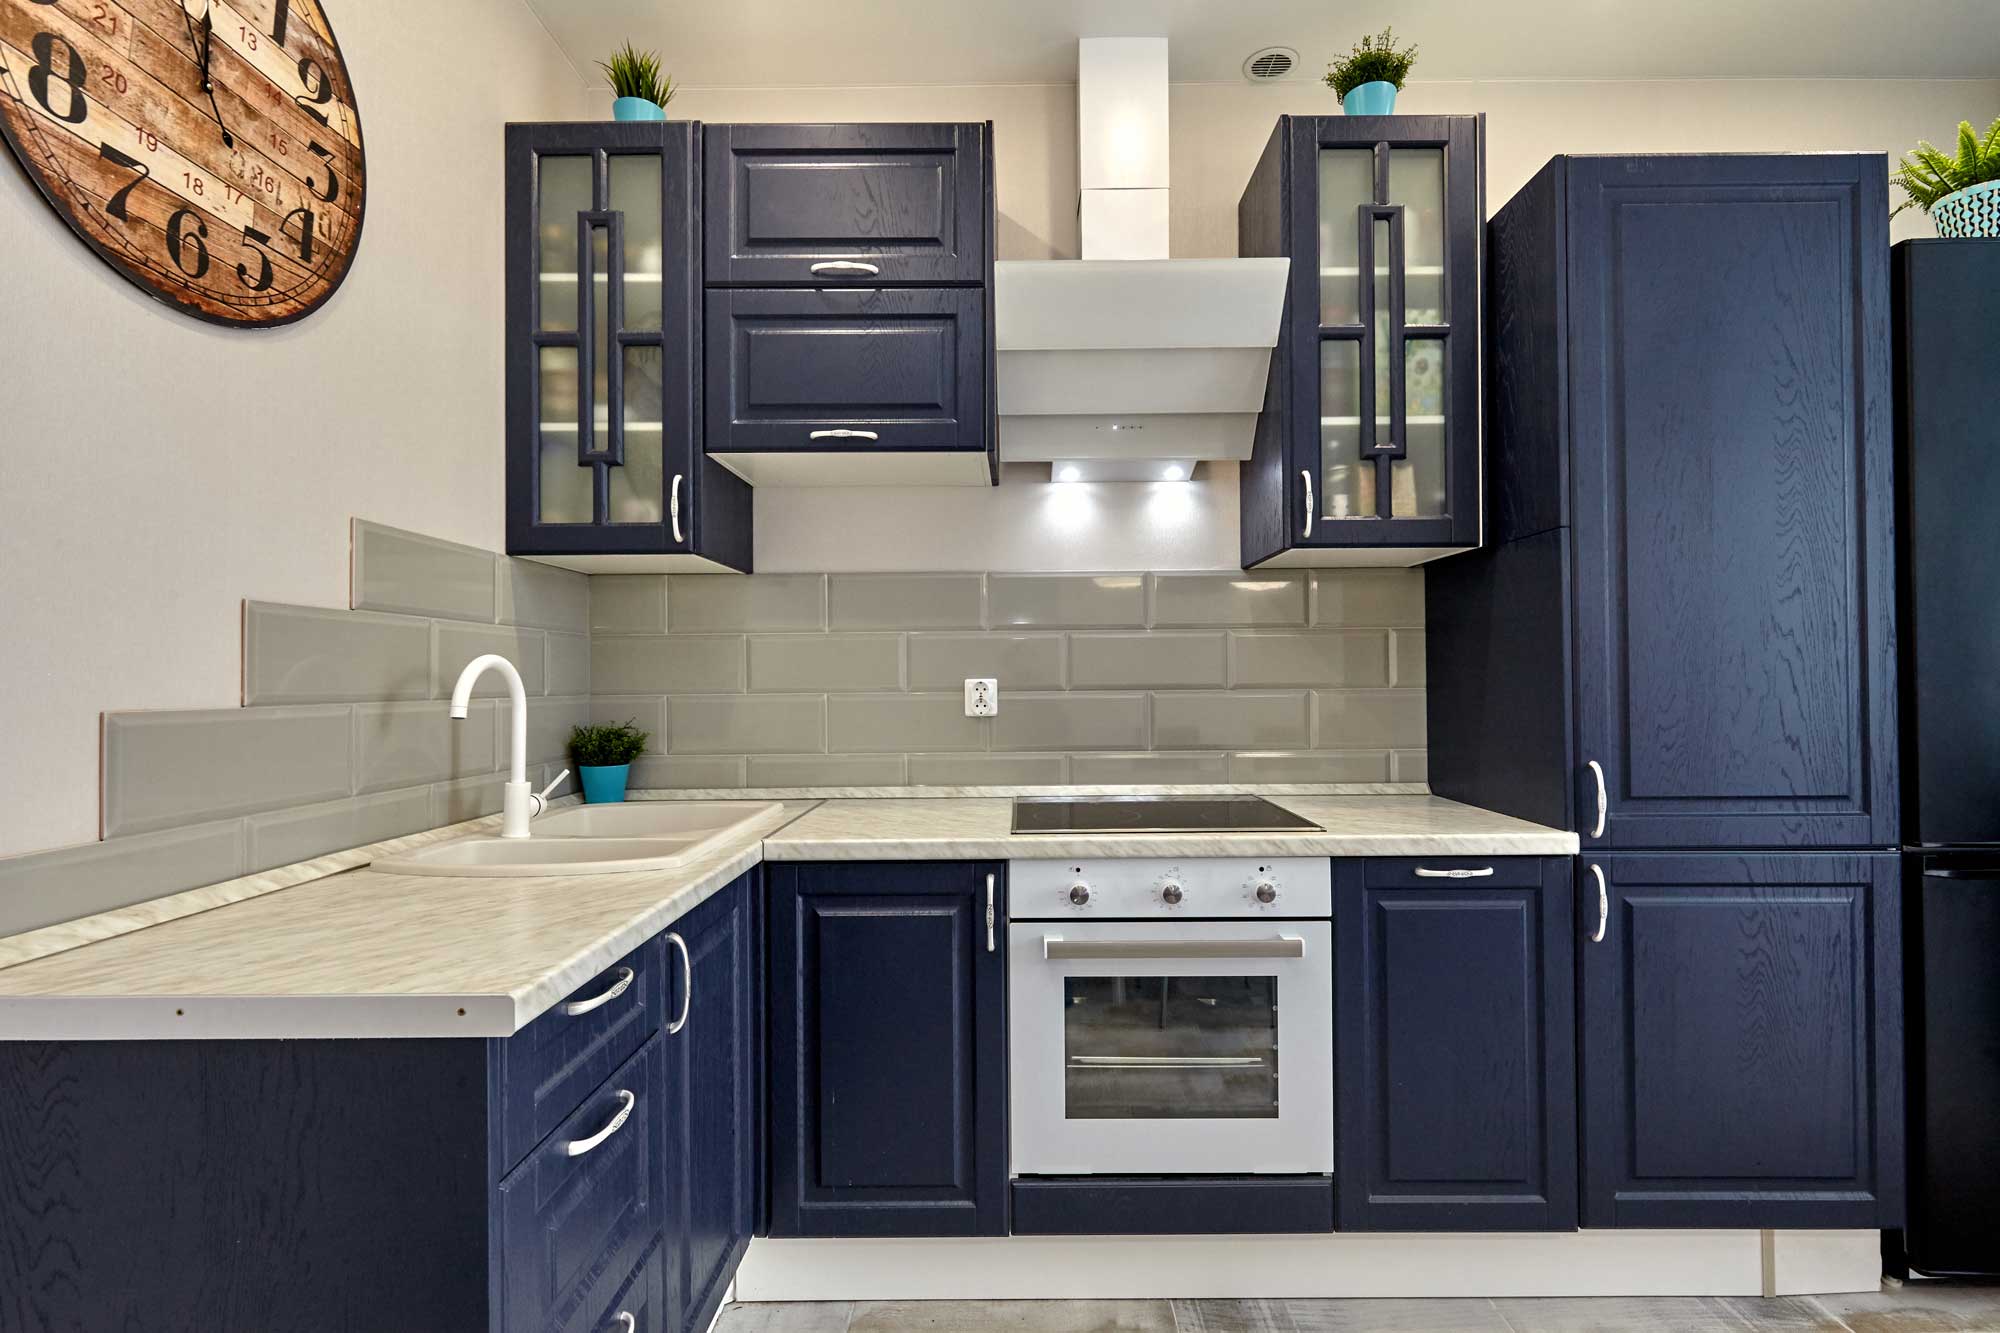 Navy blue painted cabinets in kitchen with gray tile backsplash and clock